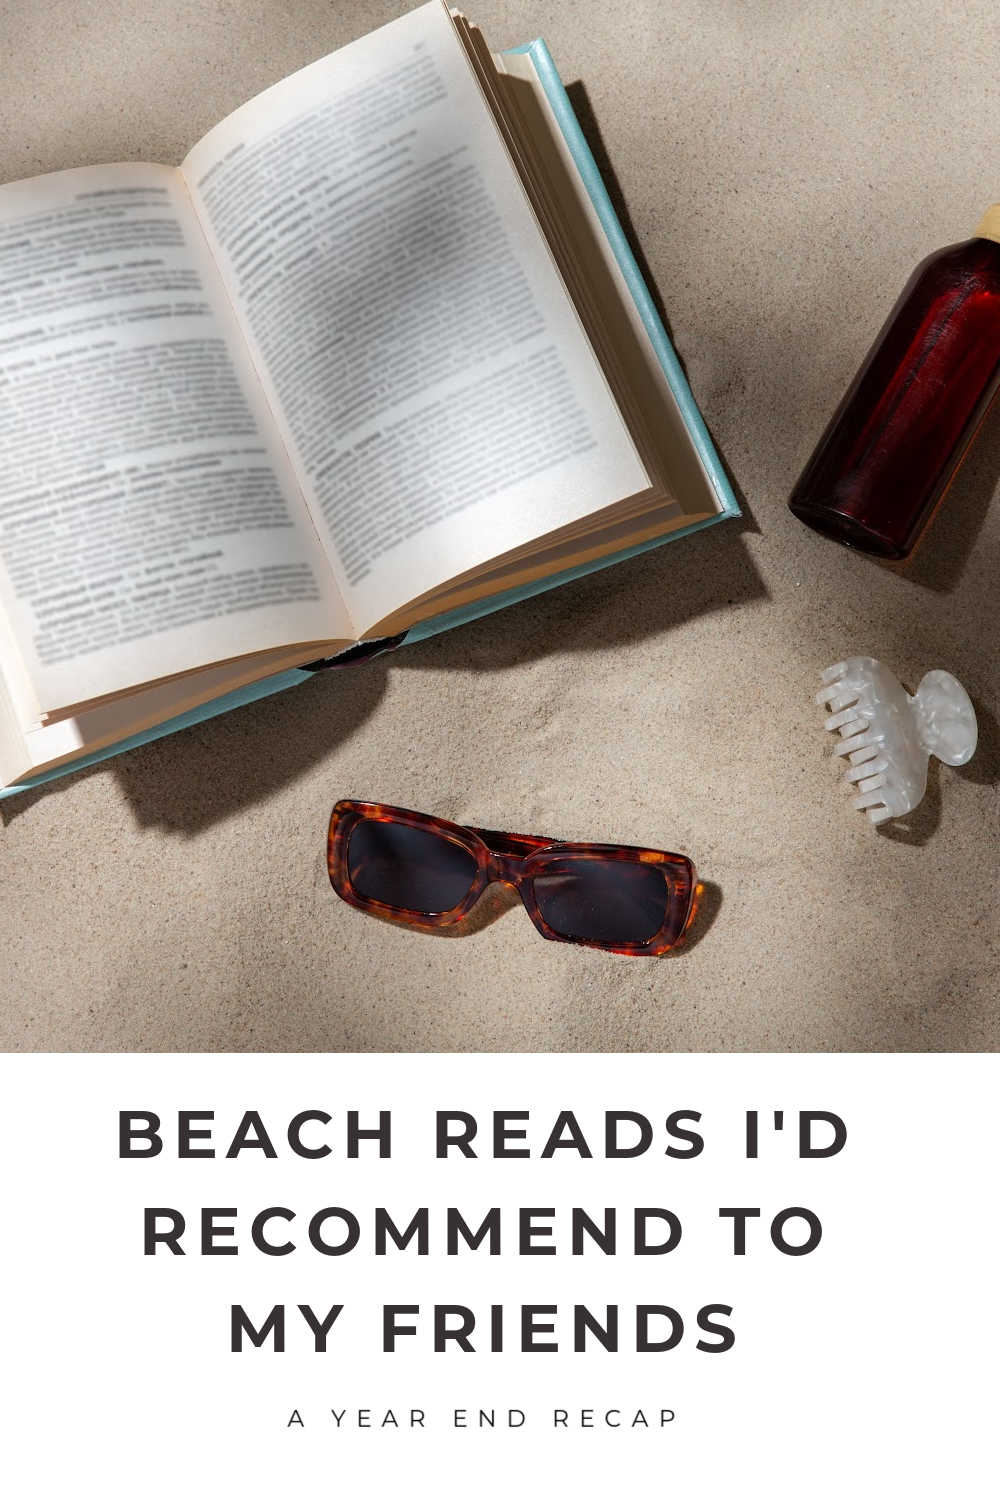 BEACH READS BOOKS I'D RECOMMEND TO FRIENDS